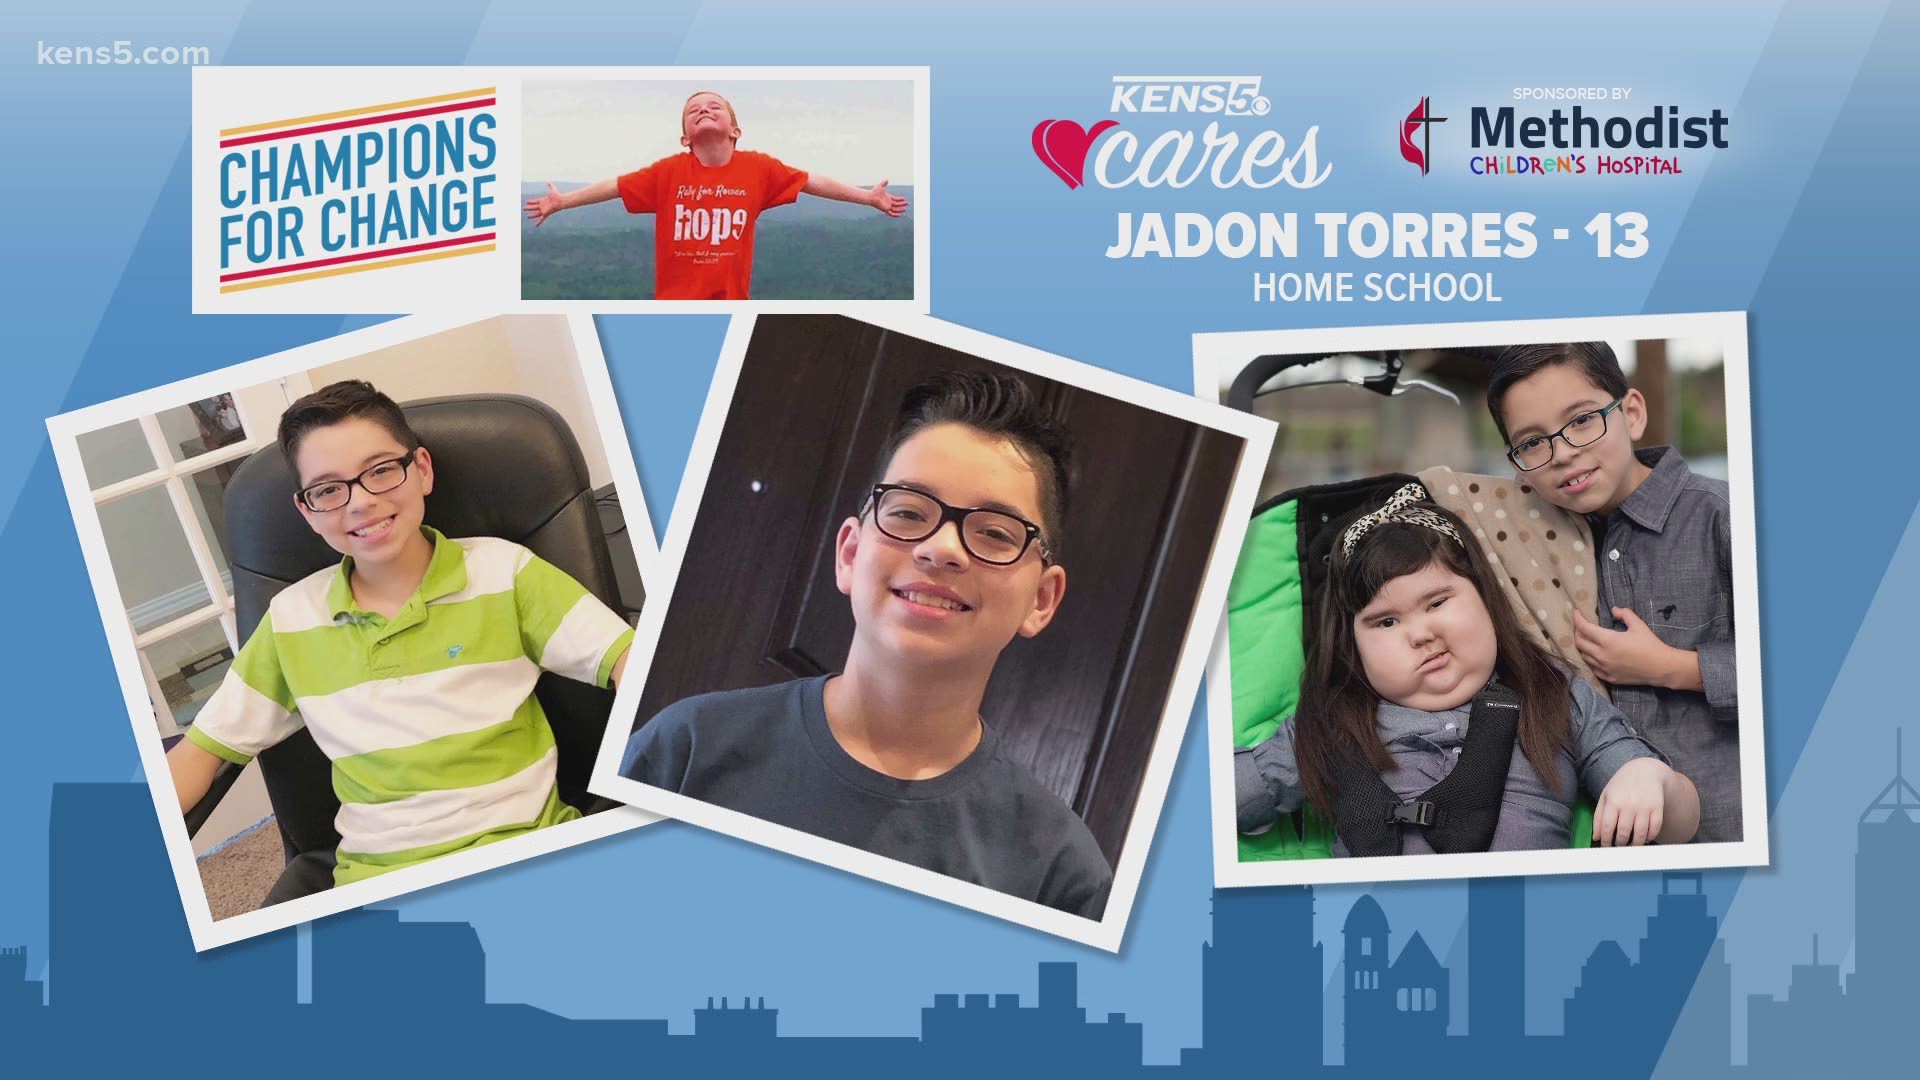 Another of our Champions for Change, Jadon Torres, lost his sister to a rare brain condition. That inspired him to help find a cure.